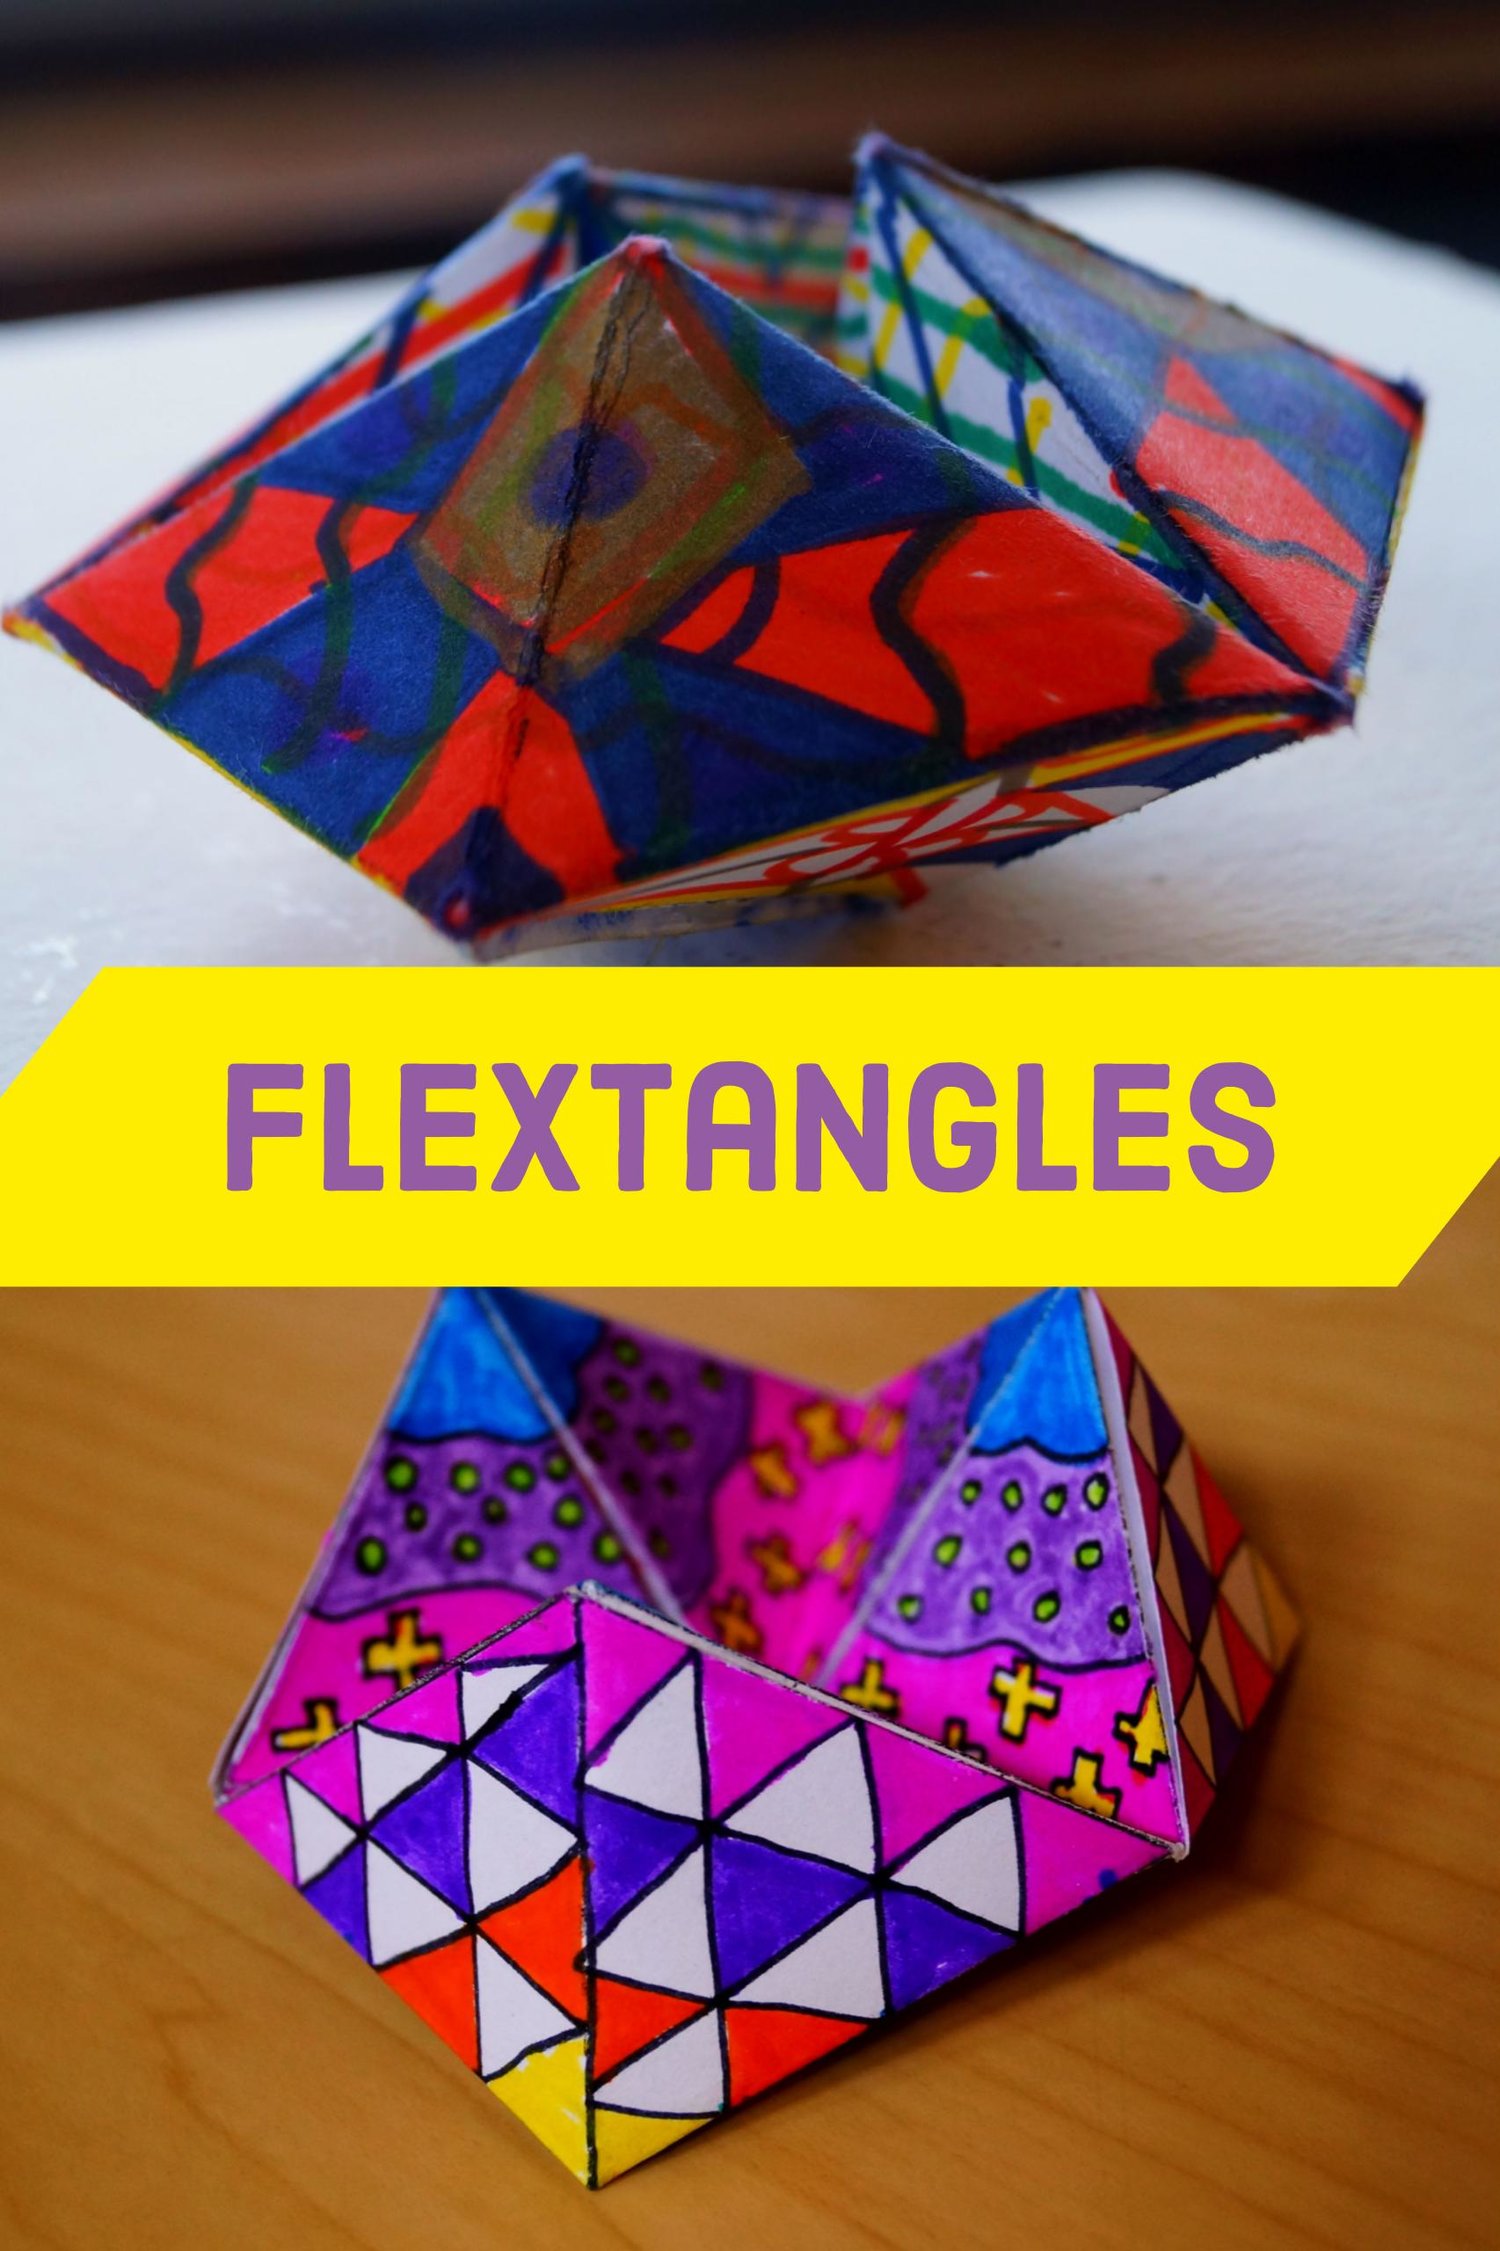 Flextangles — Grinnell Area Arts Council